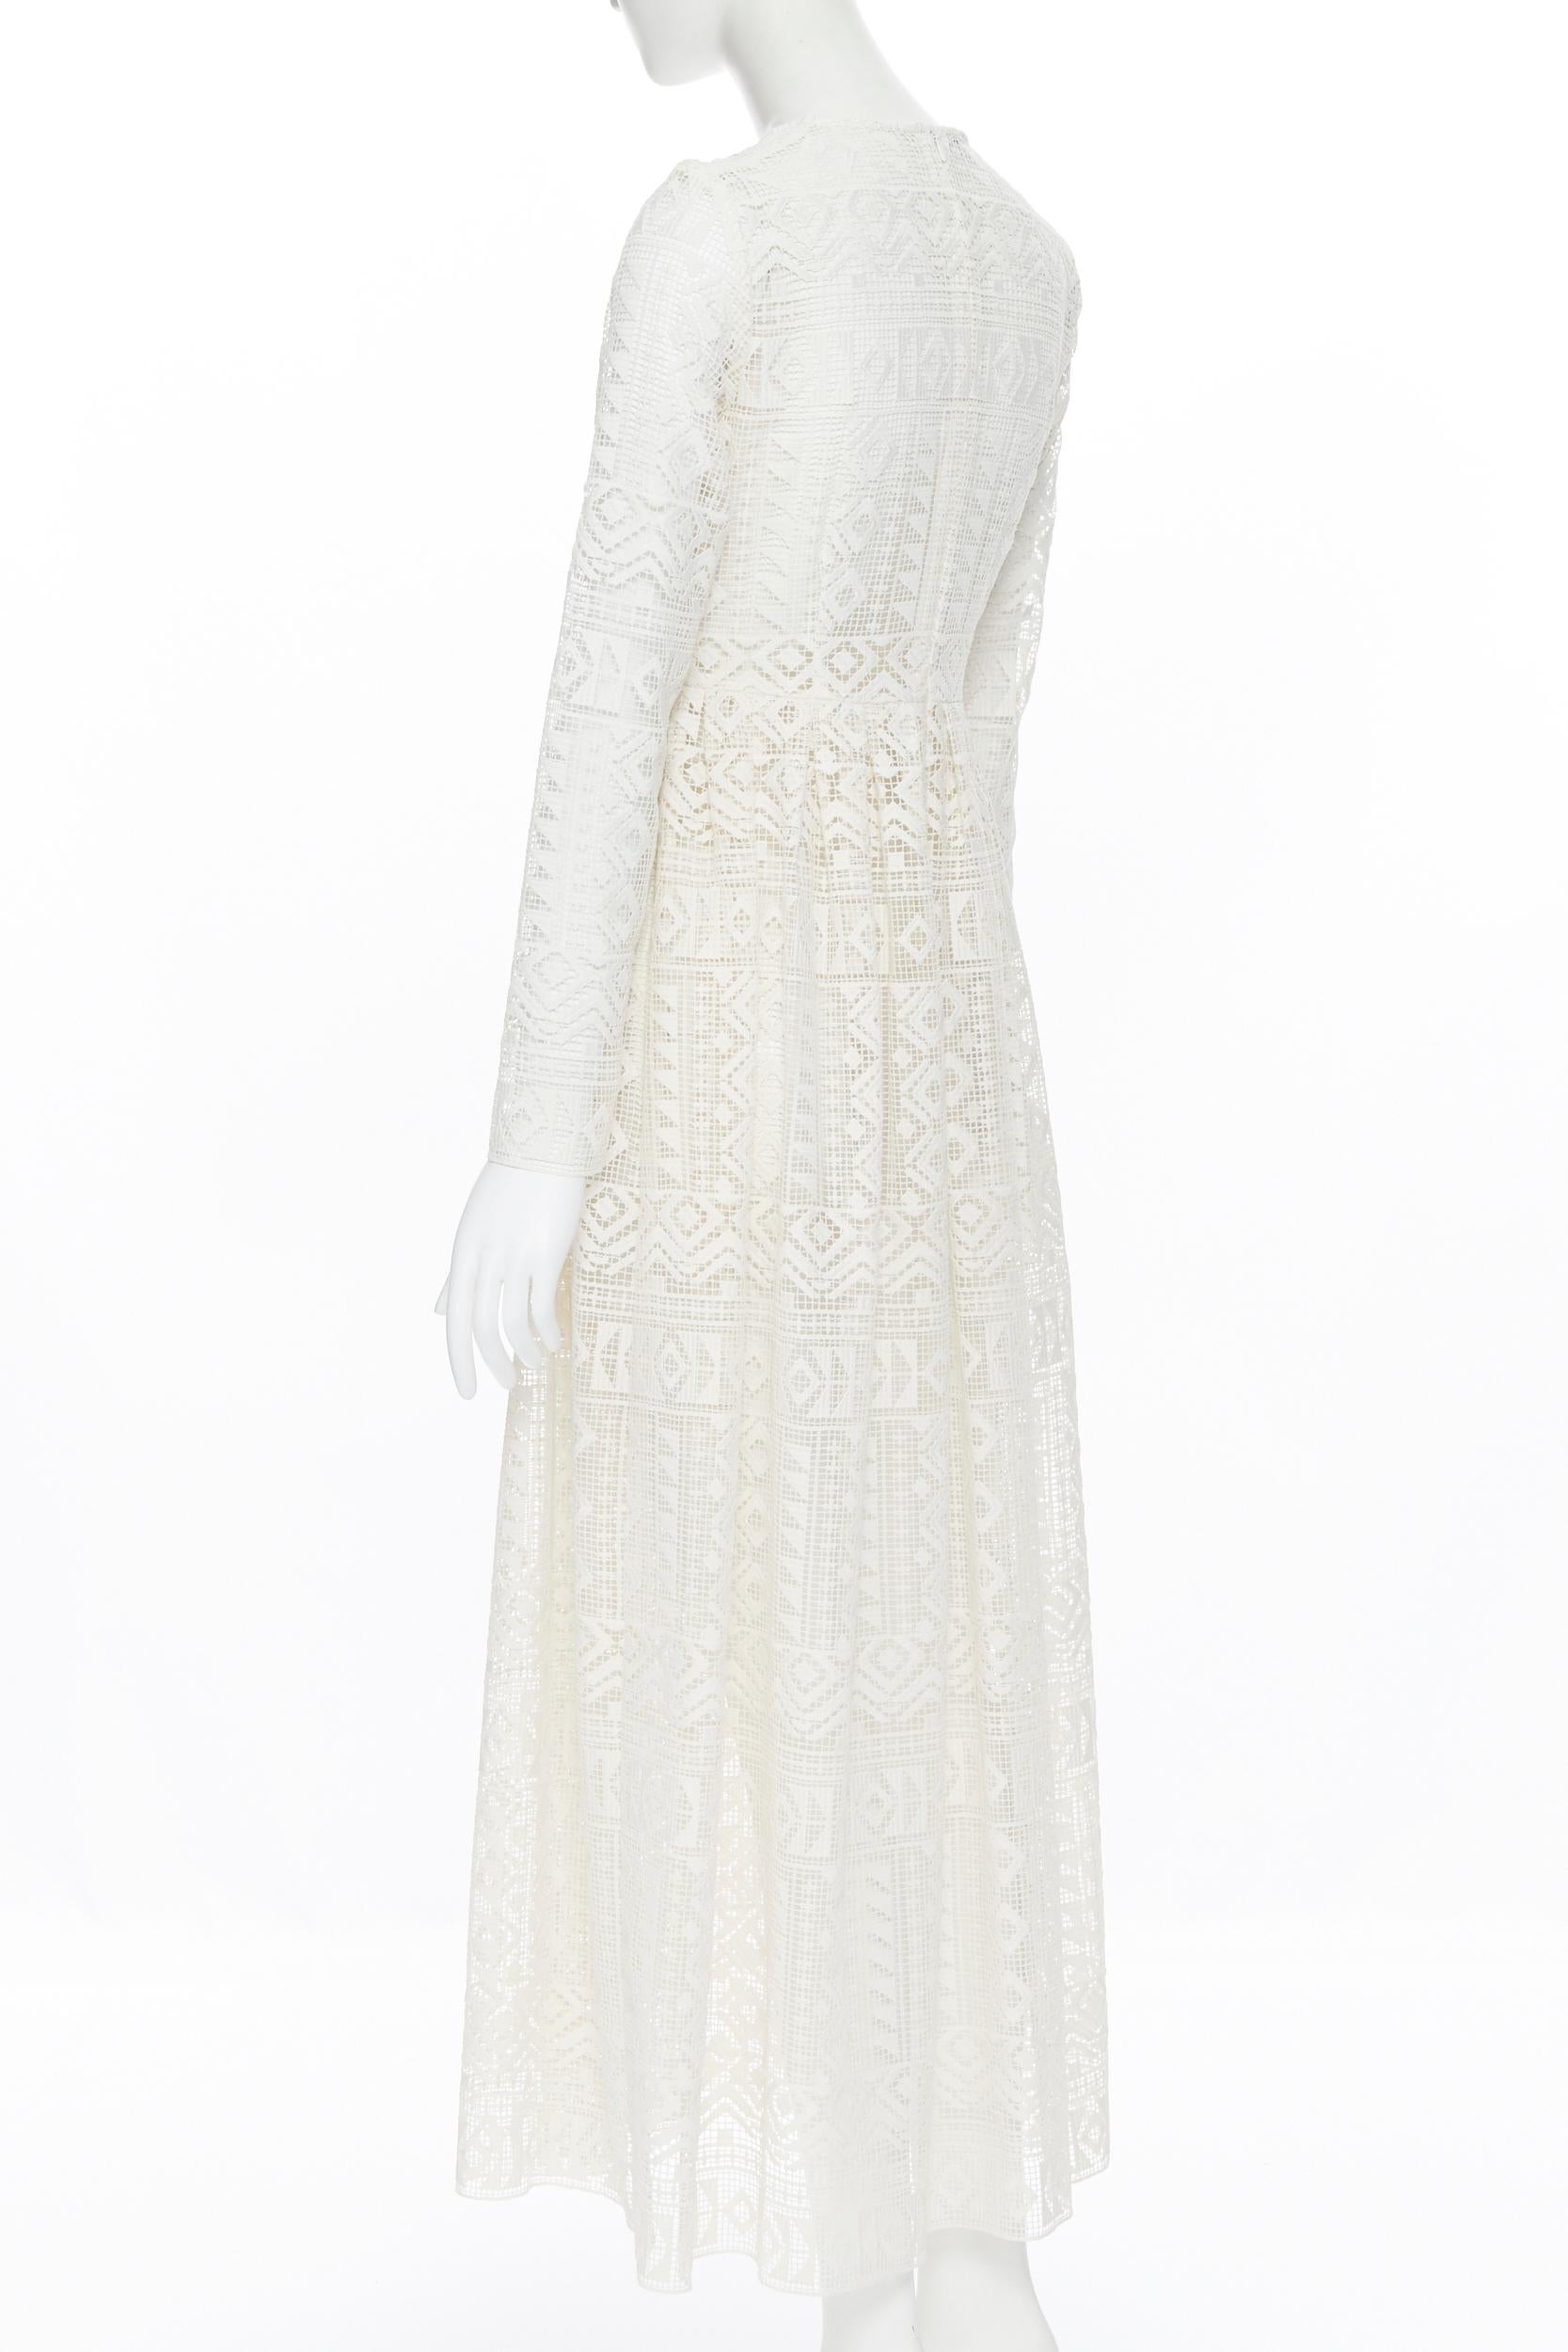 PHILOSOPHY LORENZO SERAFINI ivory ethnic boho embroidery anglais maxi dress IT38 In Excellent Condition In Hong Kong, NT